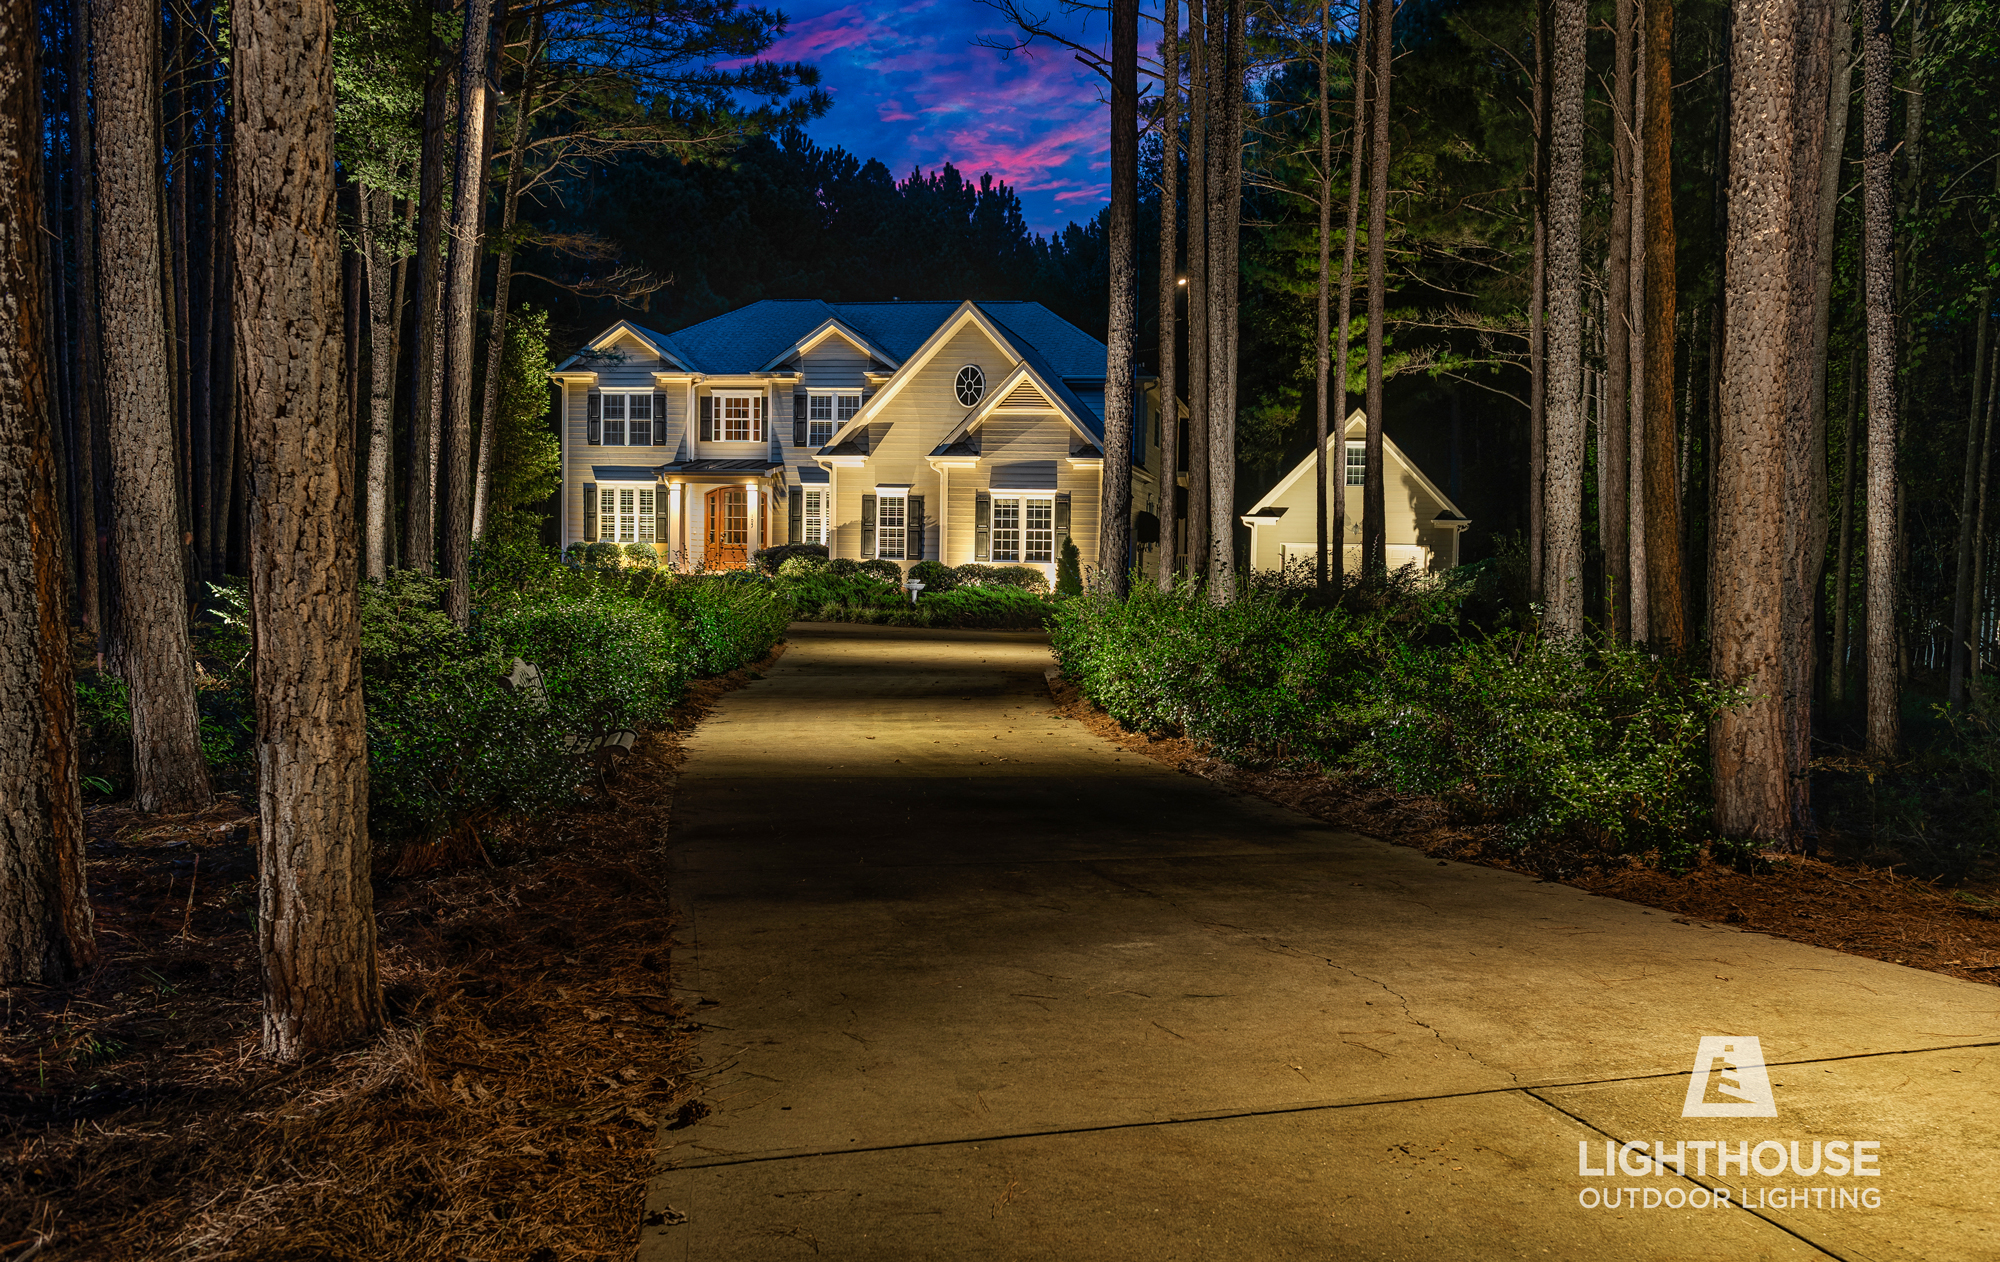 Driveway lighting in Lucedale, MS